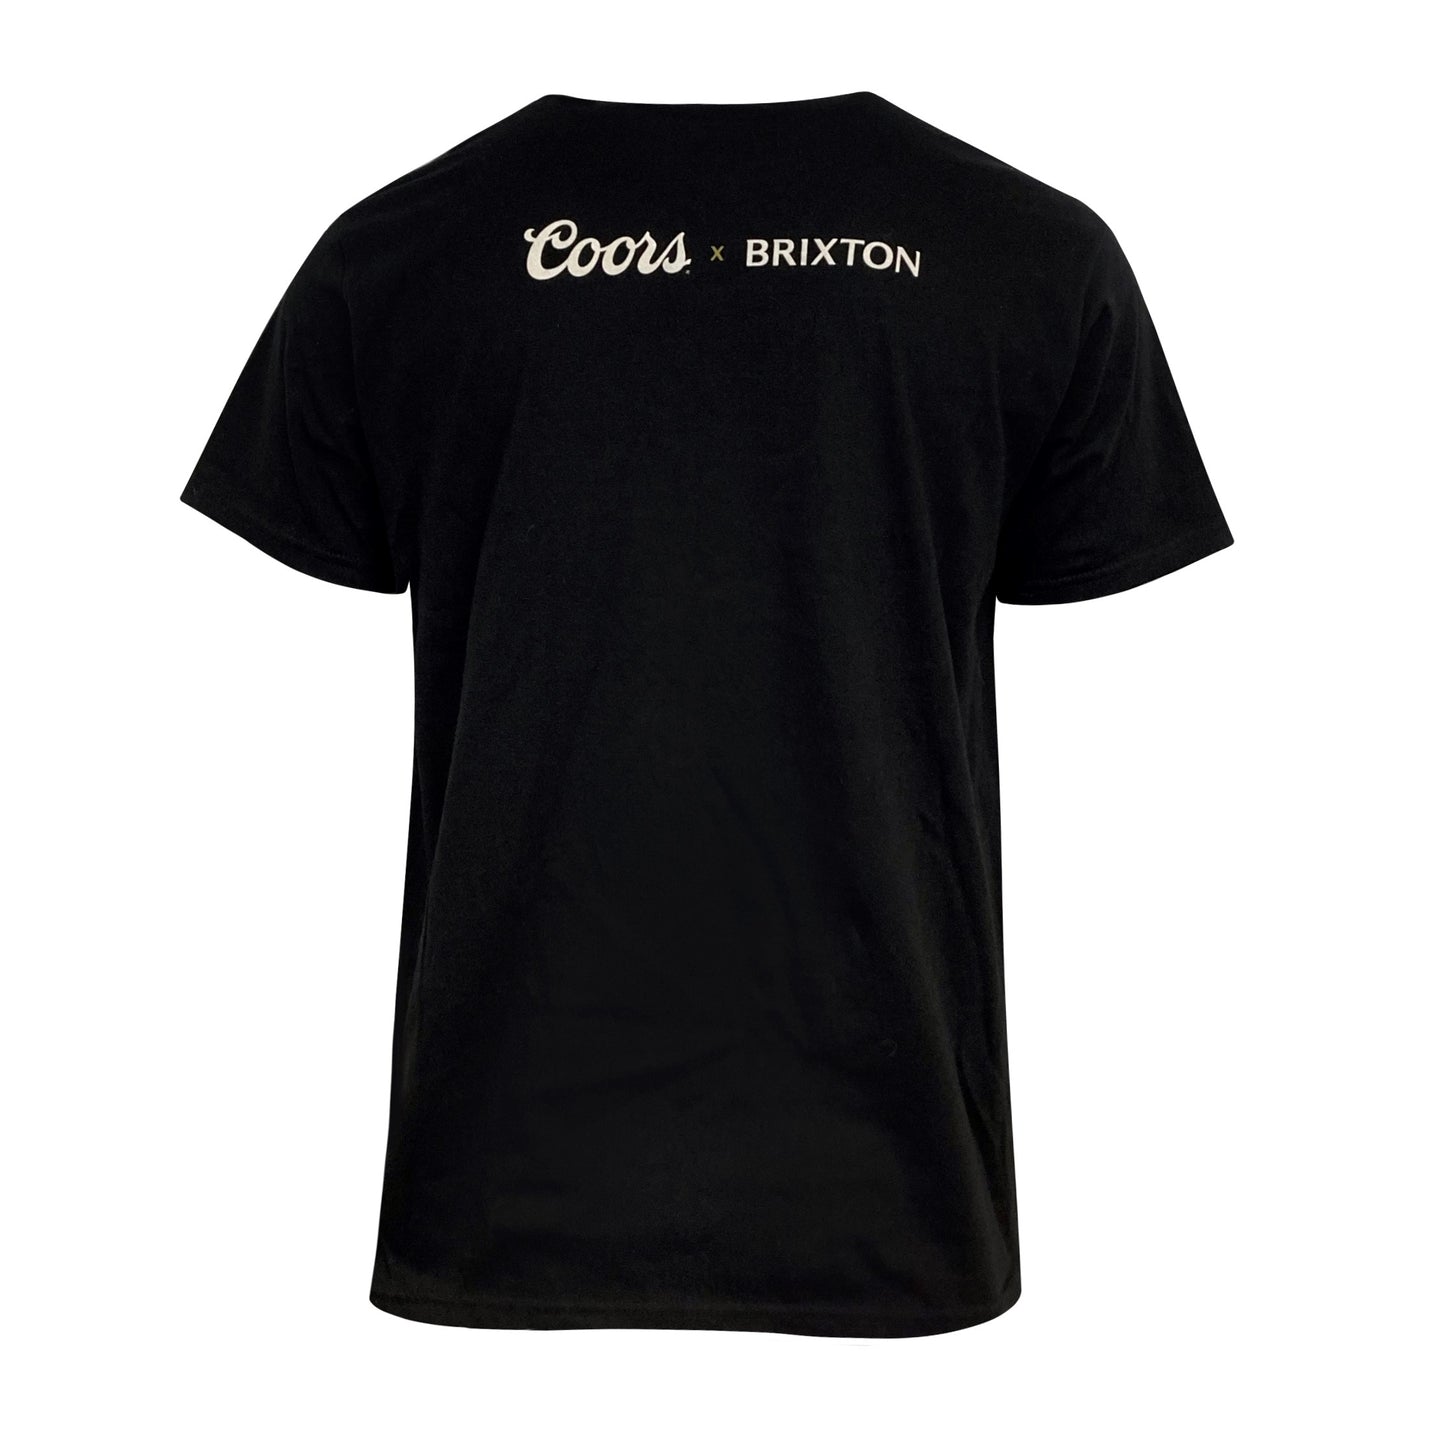 Coors x Brixton Arch Tee